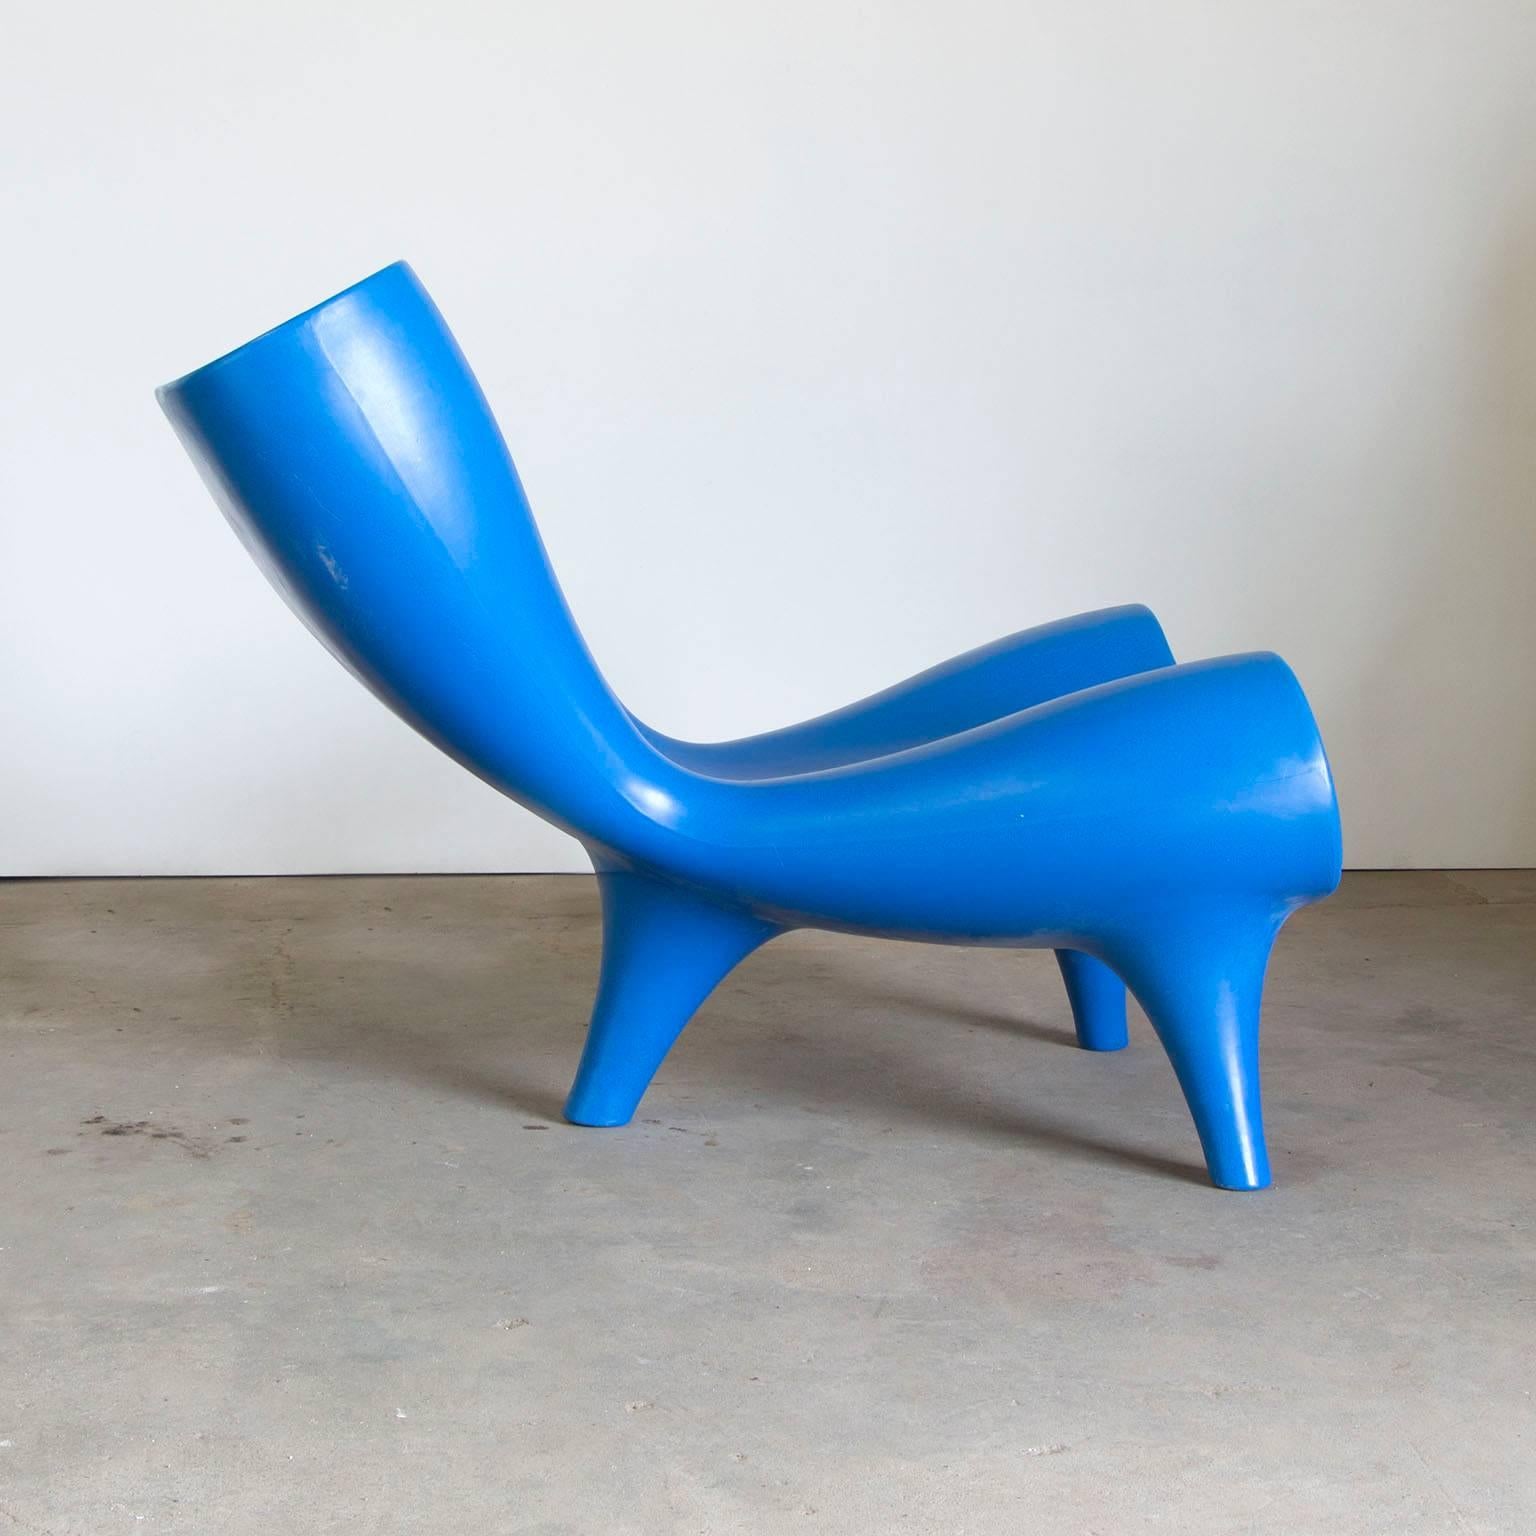 Electric blue Orgone chair, really hard to get in this color, in good condition.
The Orgone chair was designed by Marc Newson in 1983, which at 26 years old does just about qualify it as retro.

The original limited set was designed in 1983 and made